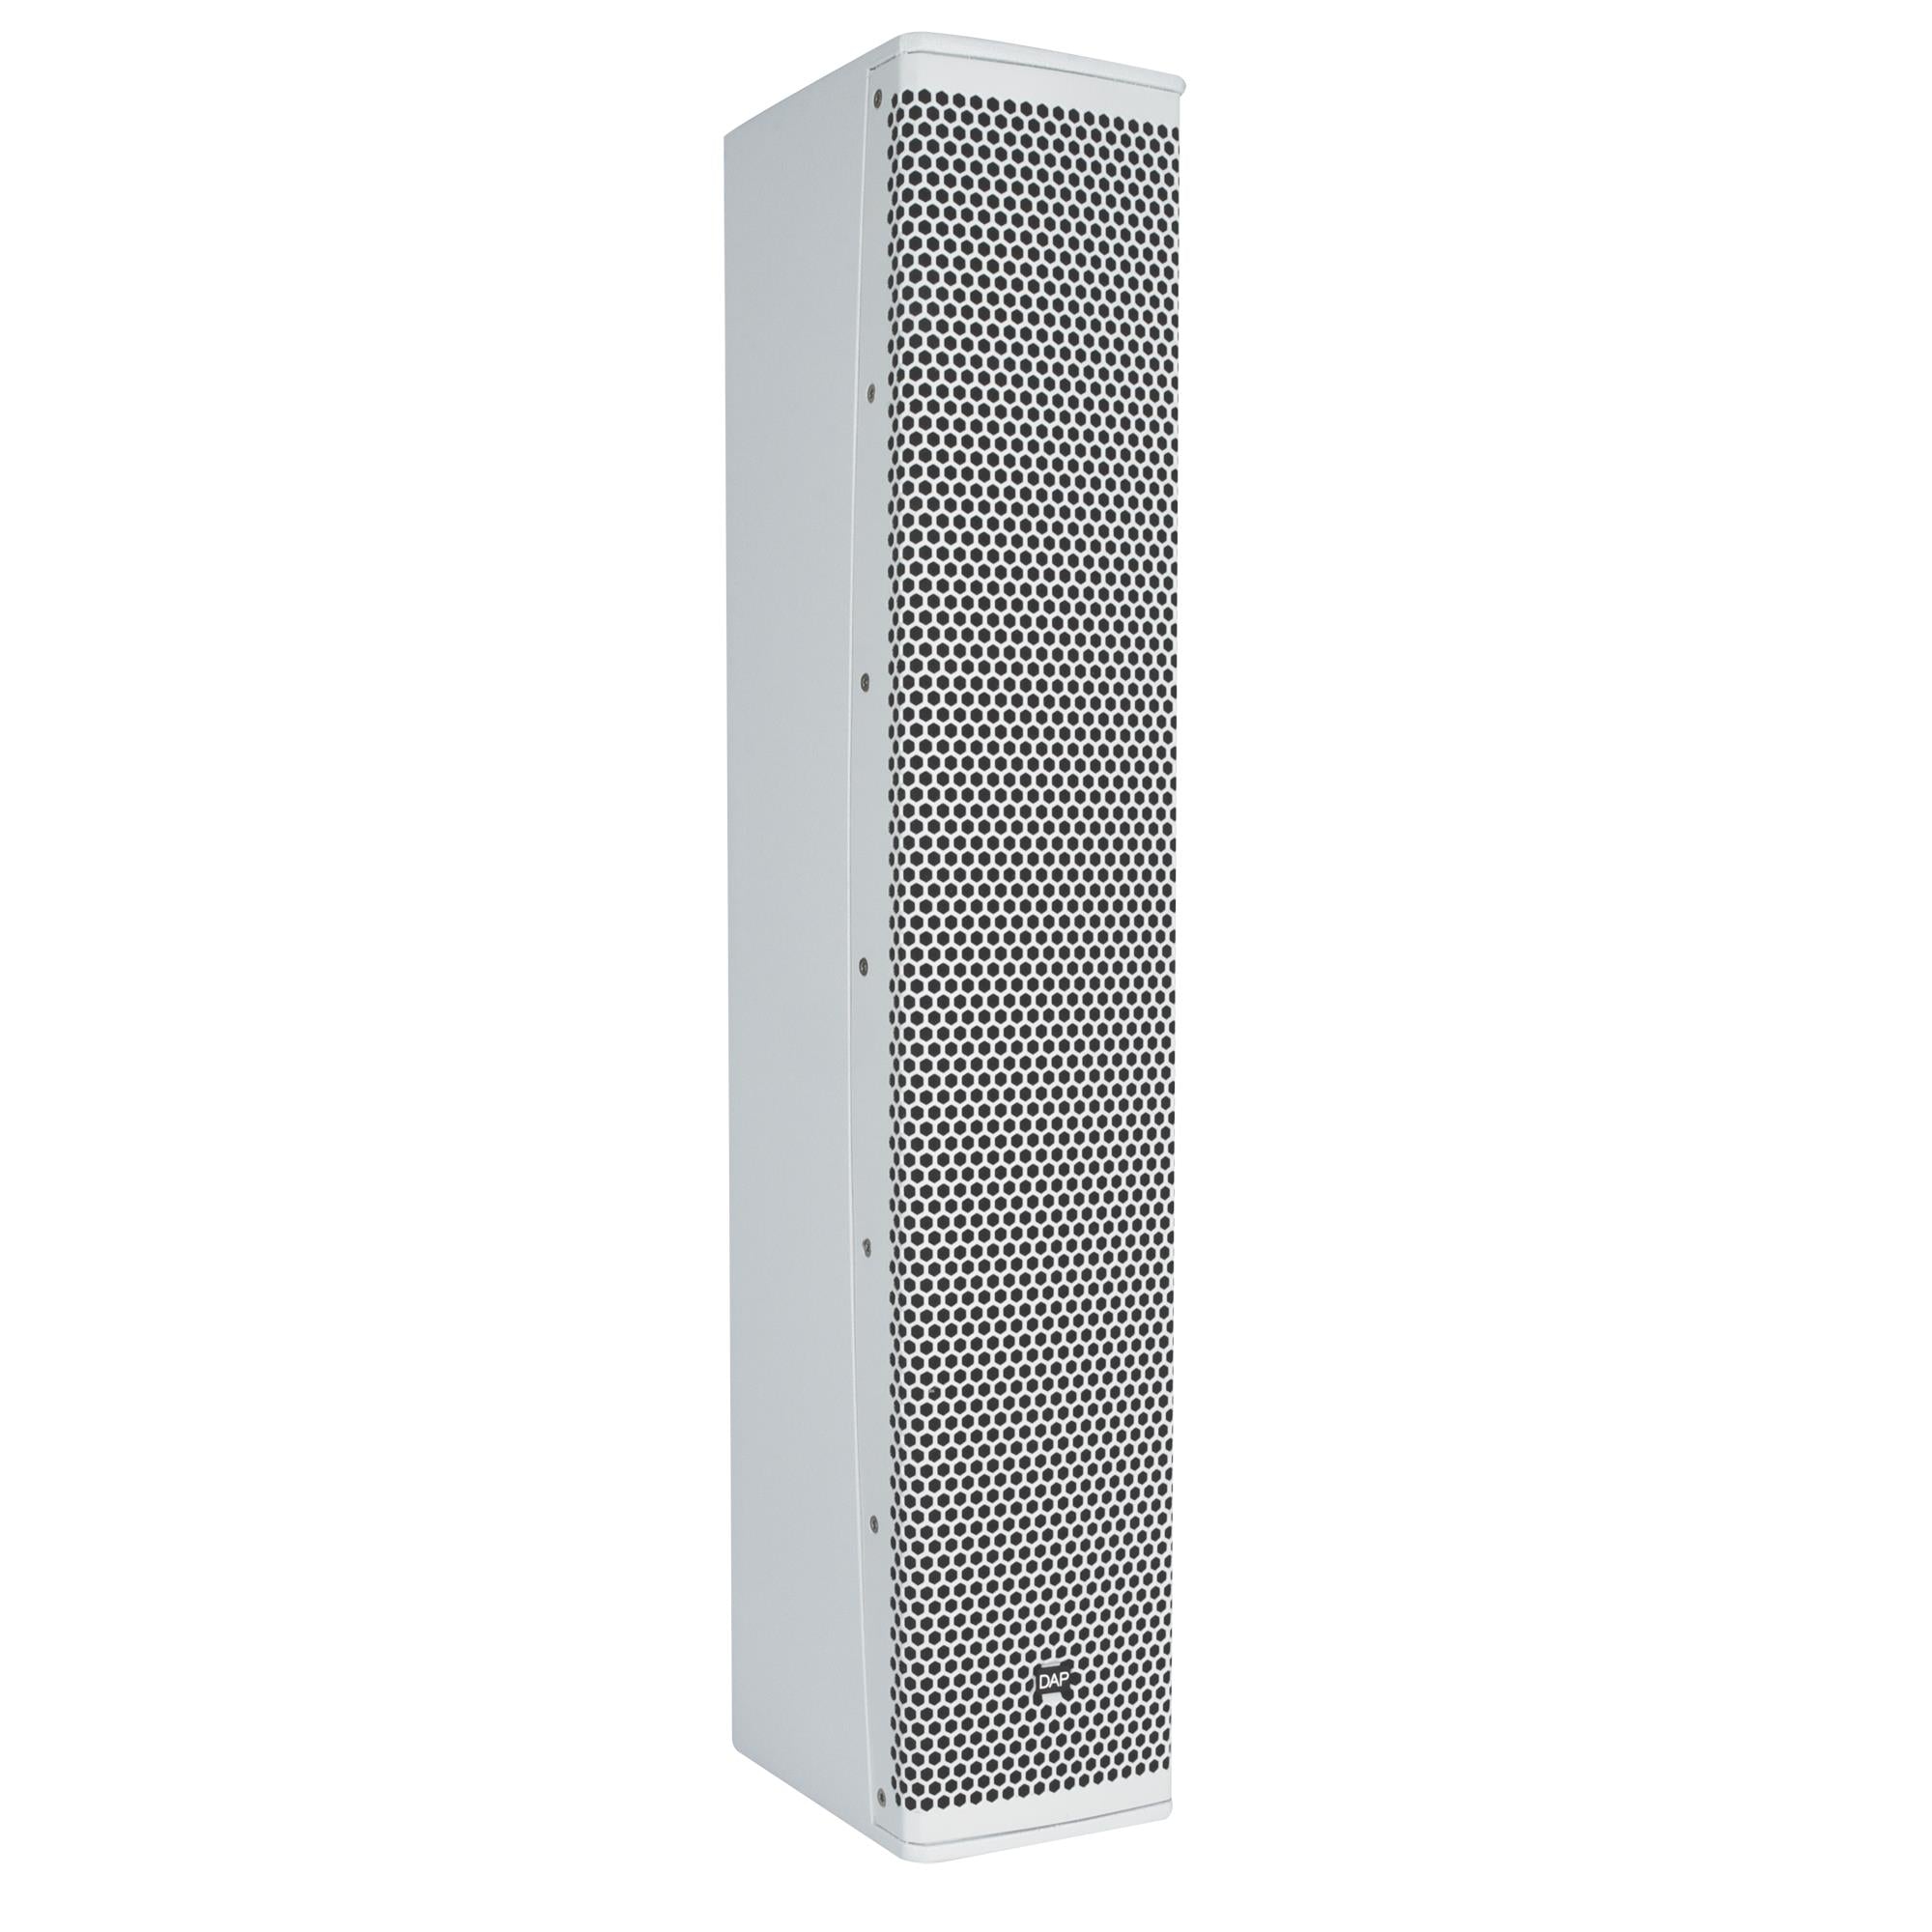 2 x DAP Frigga 12" White Active Column PA System With Carry Bags